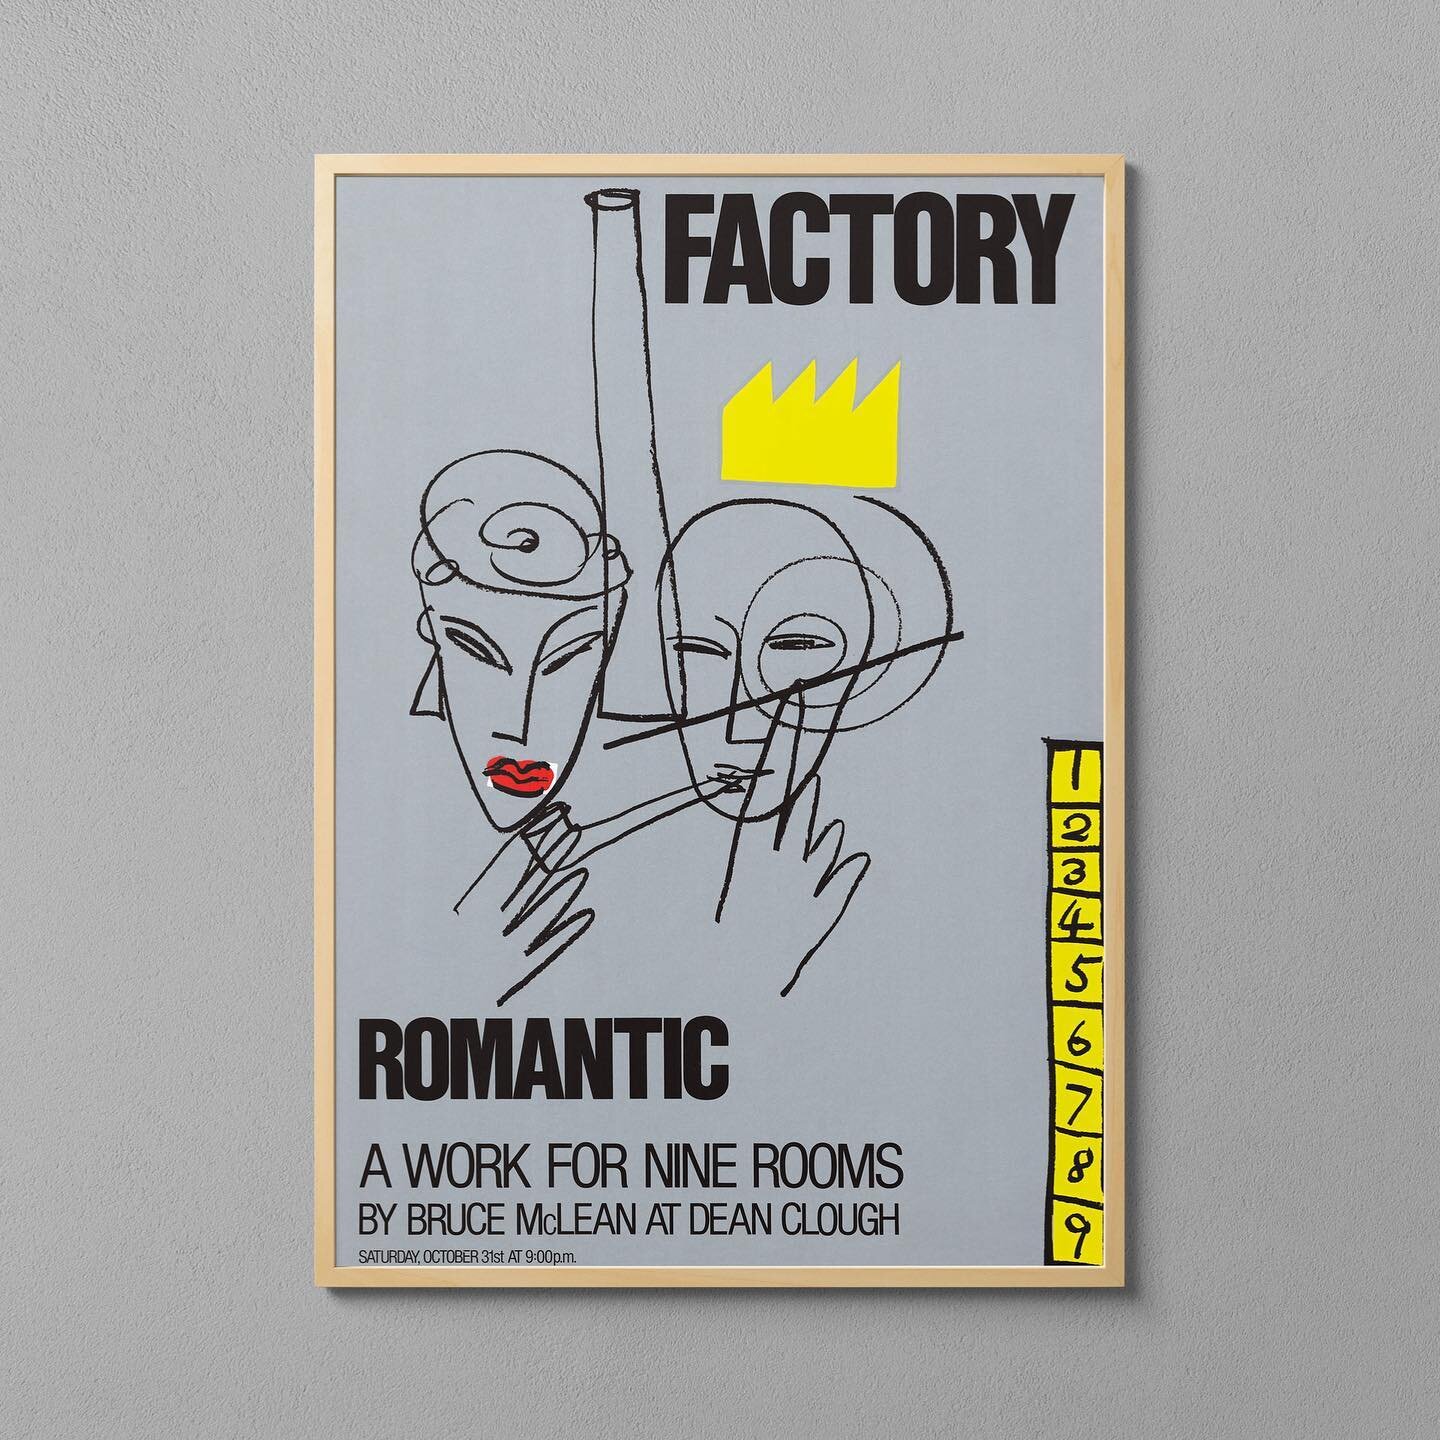 Available to buy exclusively at Department for Art. Bruce McLean Factory, Romantic Poster. A Work for Nine Rooms, Dean Clough Gallery &ndash; 1989.
.
Department for Art (DFA) are pleased to announce the release of a series of facsimiles of original B